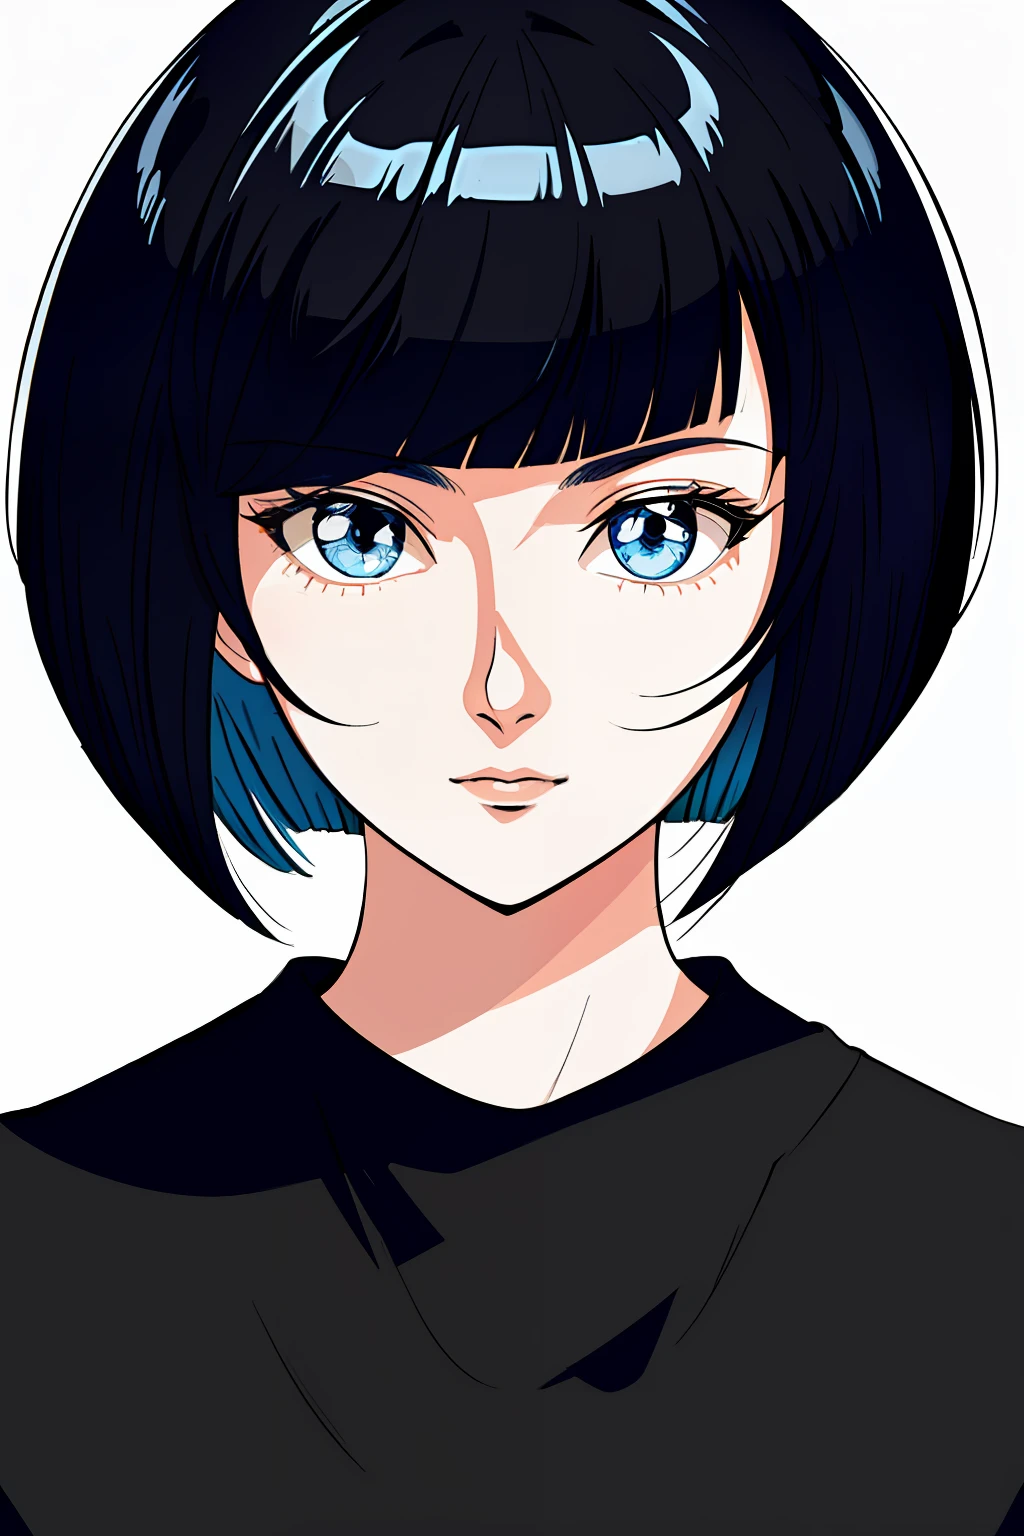 close up face, s face, very detail, a lot of details, bright colours, very extremely beautiful,  ((tmasterpiece, minimalism)), Old Anime Style, (Short Hair Hair, Bob hairstyle)